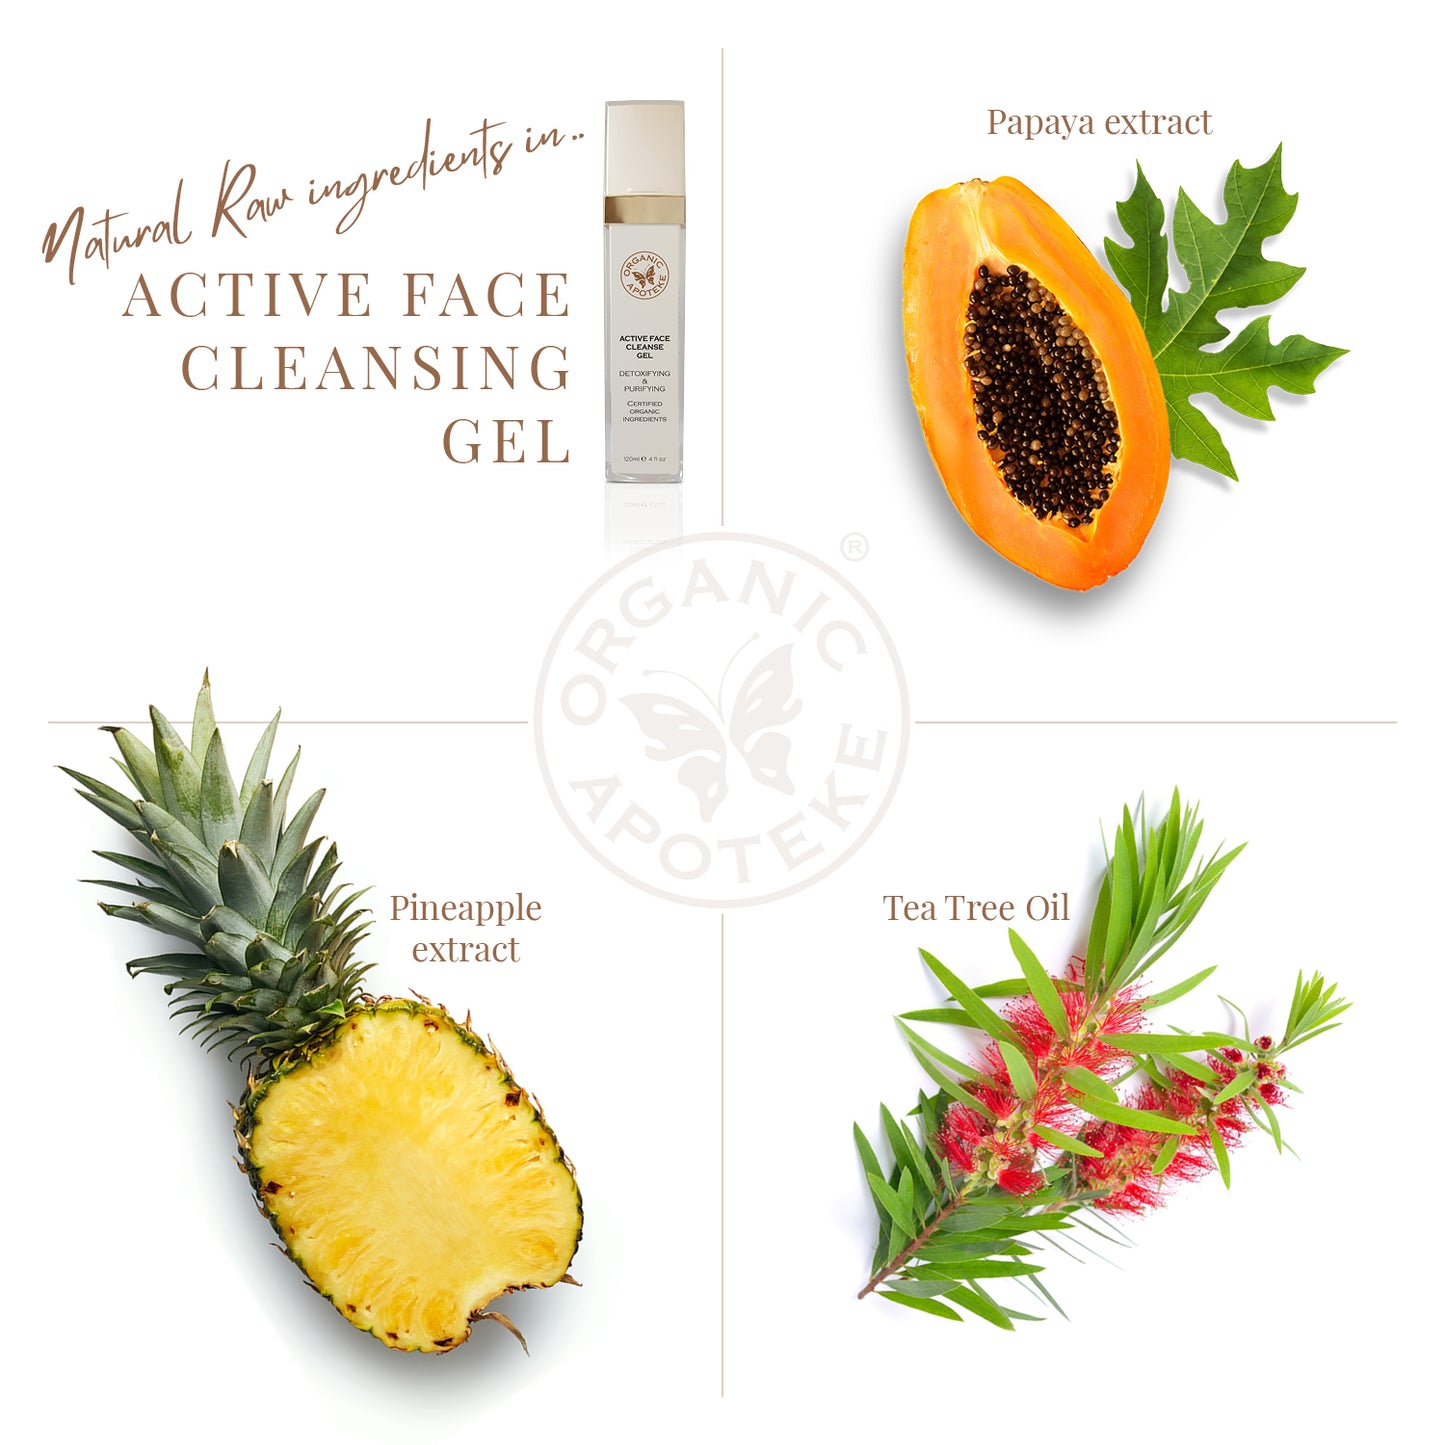 Active Face Cleanse Gel - The Best Cleanser for Oily Skin